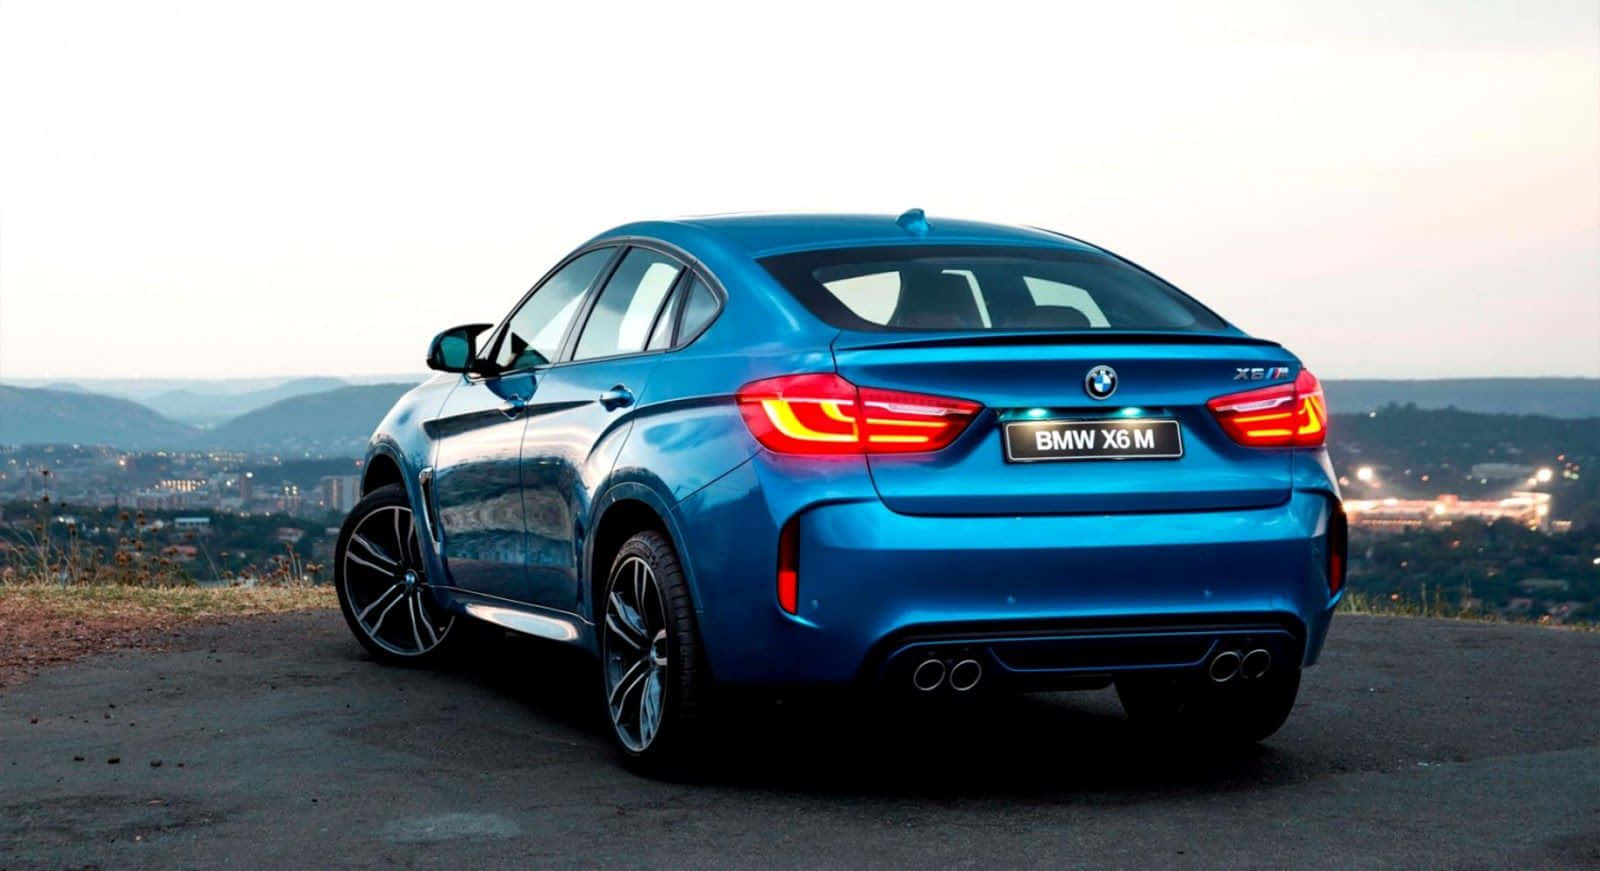 Take on the open road with the BMW X6 M